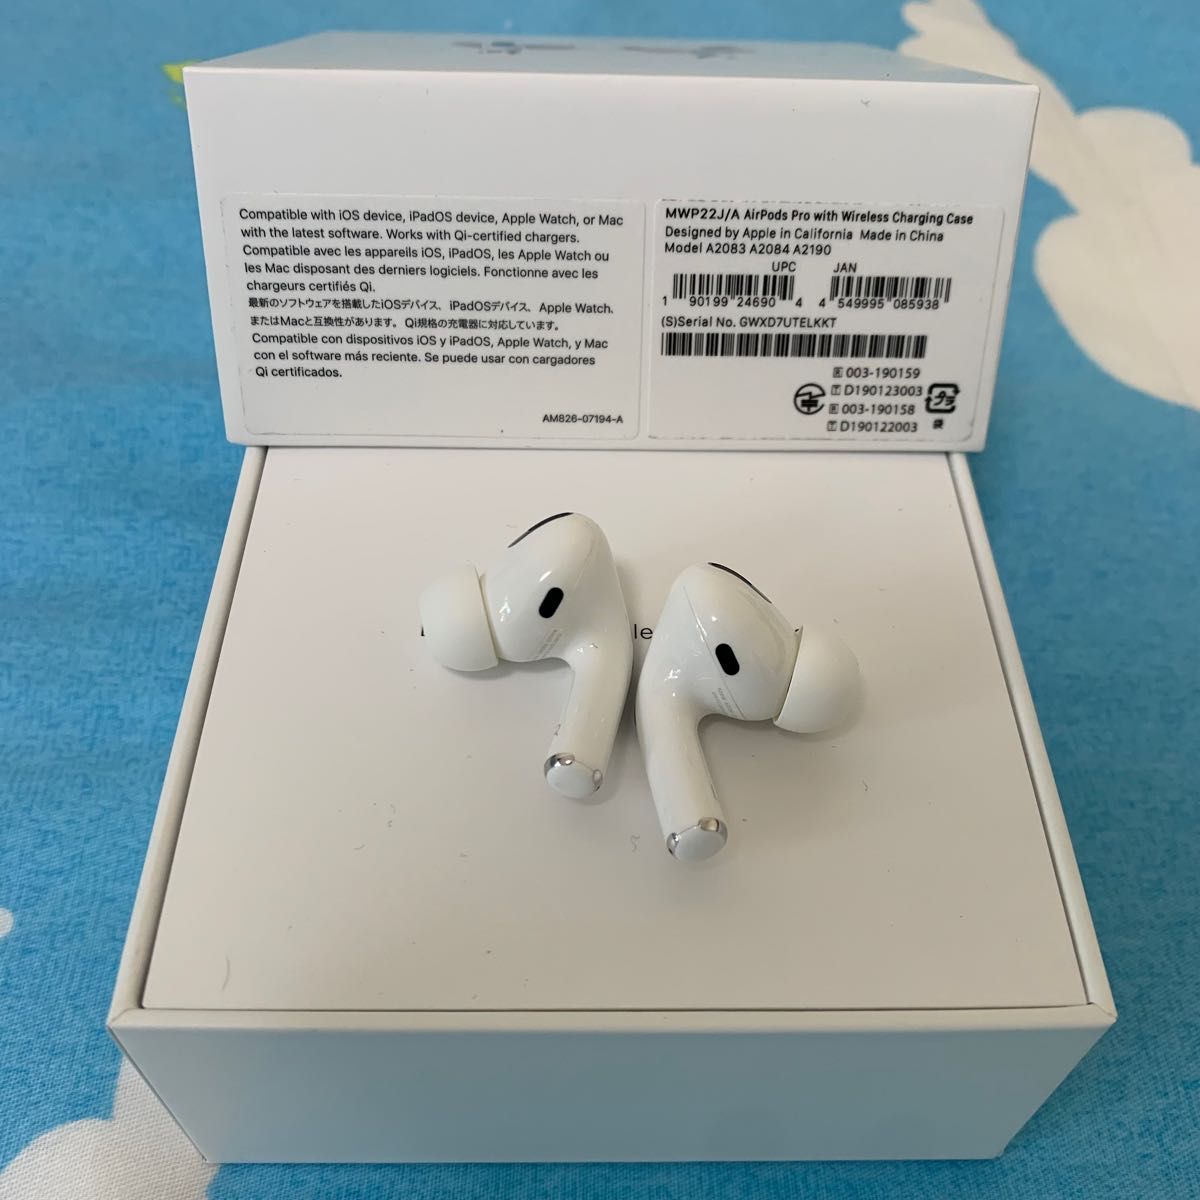 SALE／97%OFF】【SALE／97%OFF】24時間以内発送 Airpods Pro エアポッズプロ 両耳のみ イヤフォン 